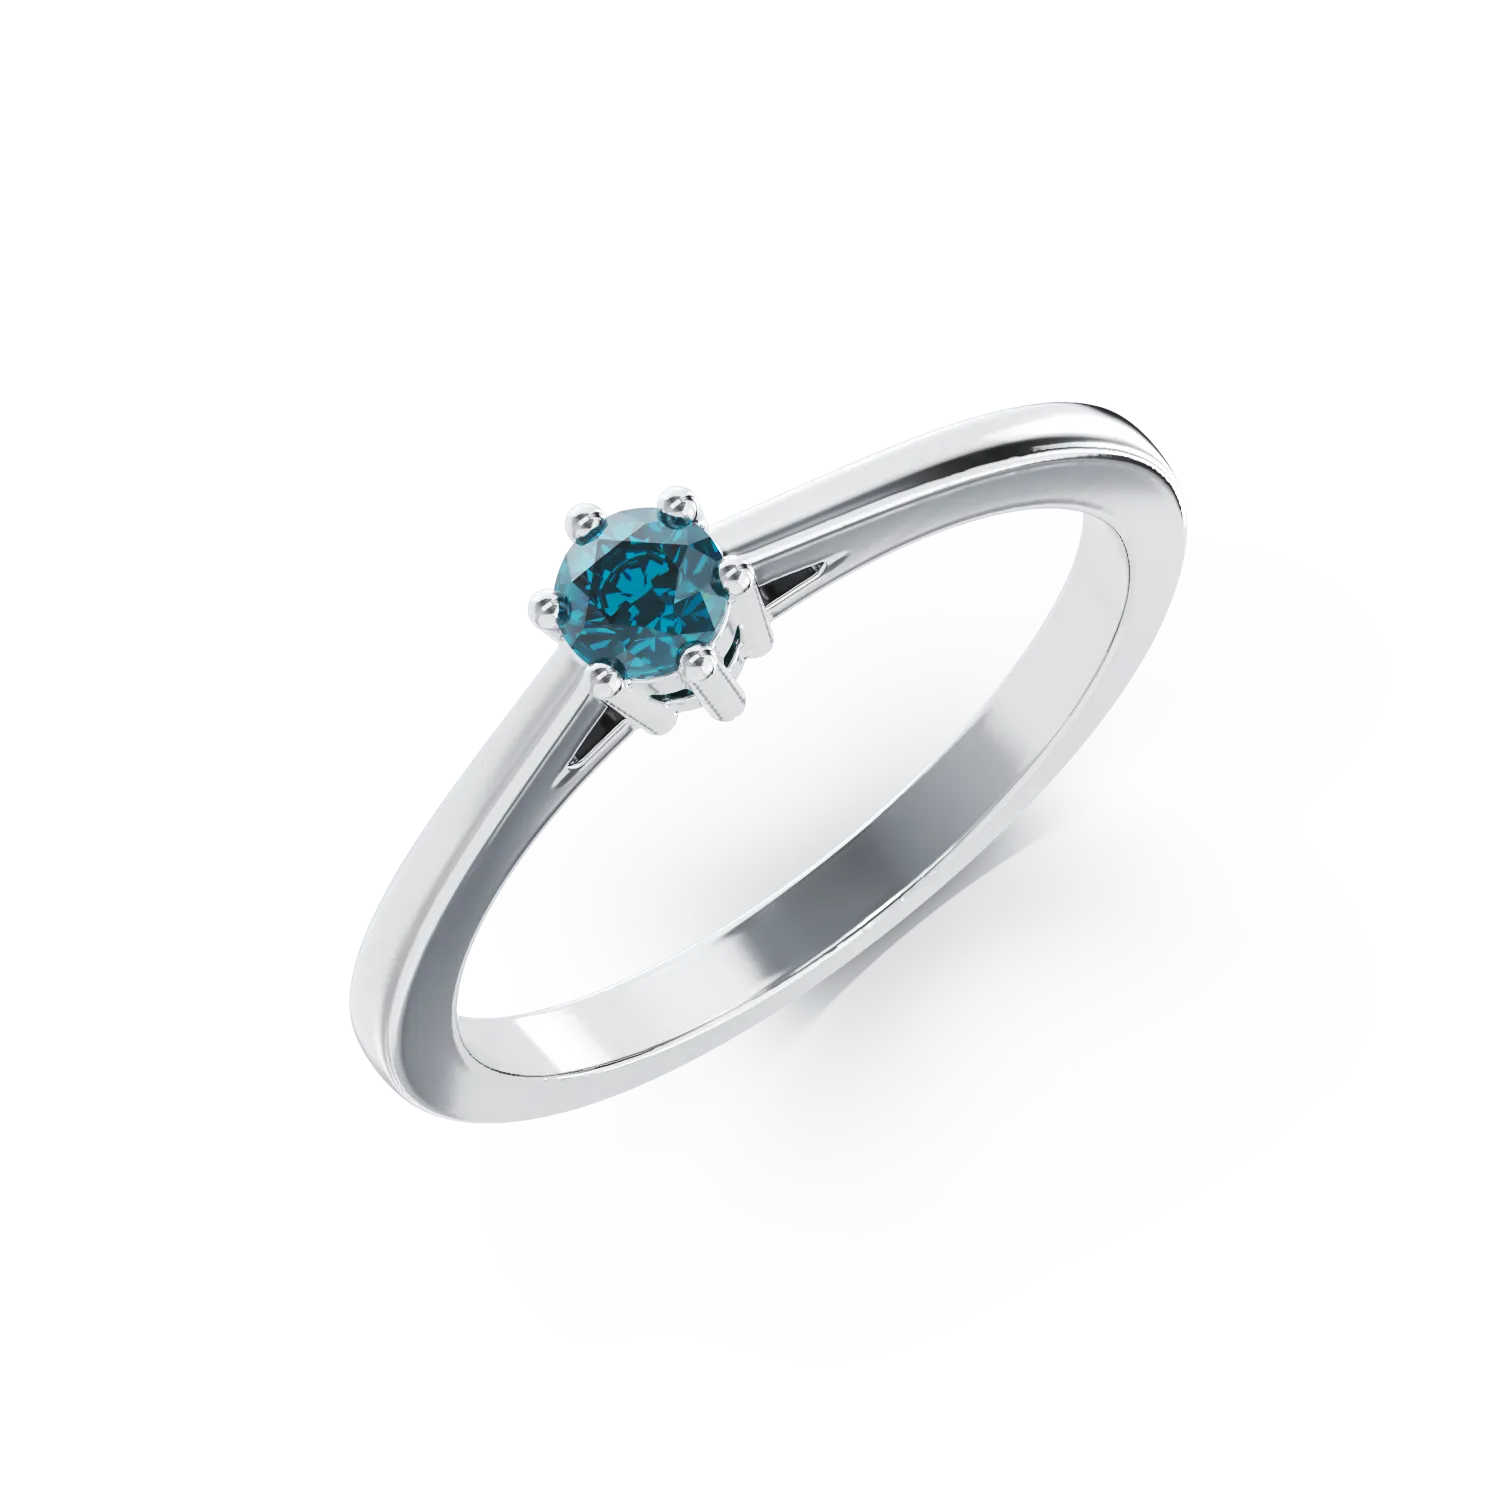 18K white gold engagement ring with 0.4ct blue diamond